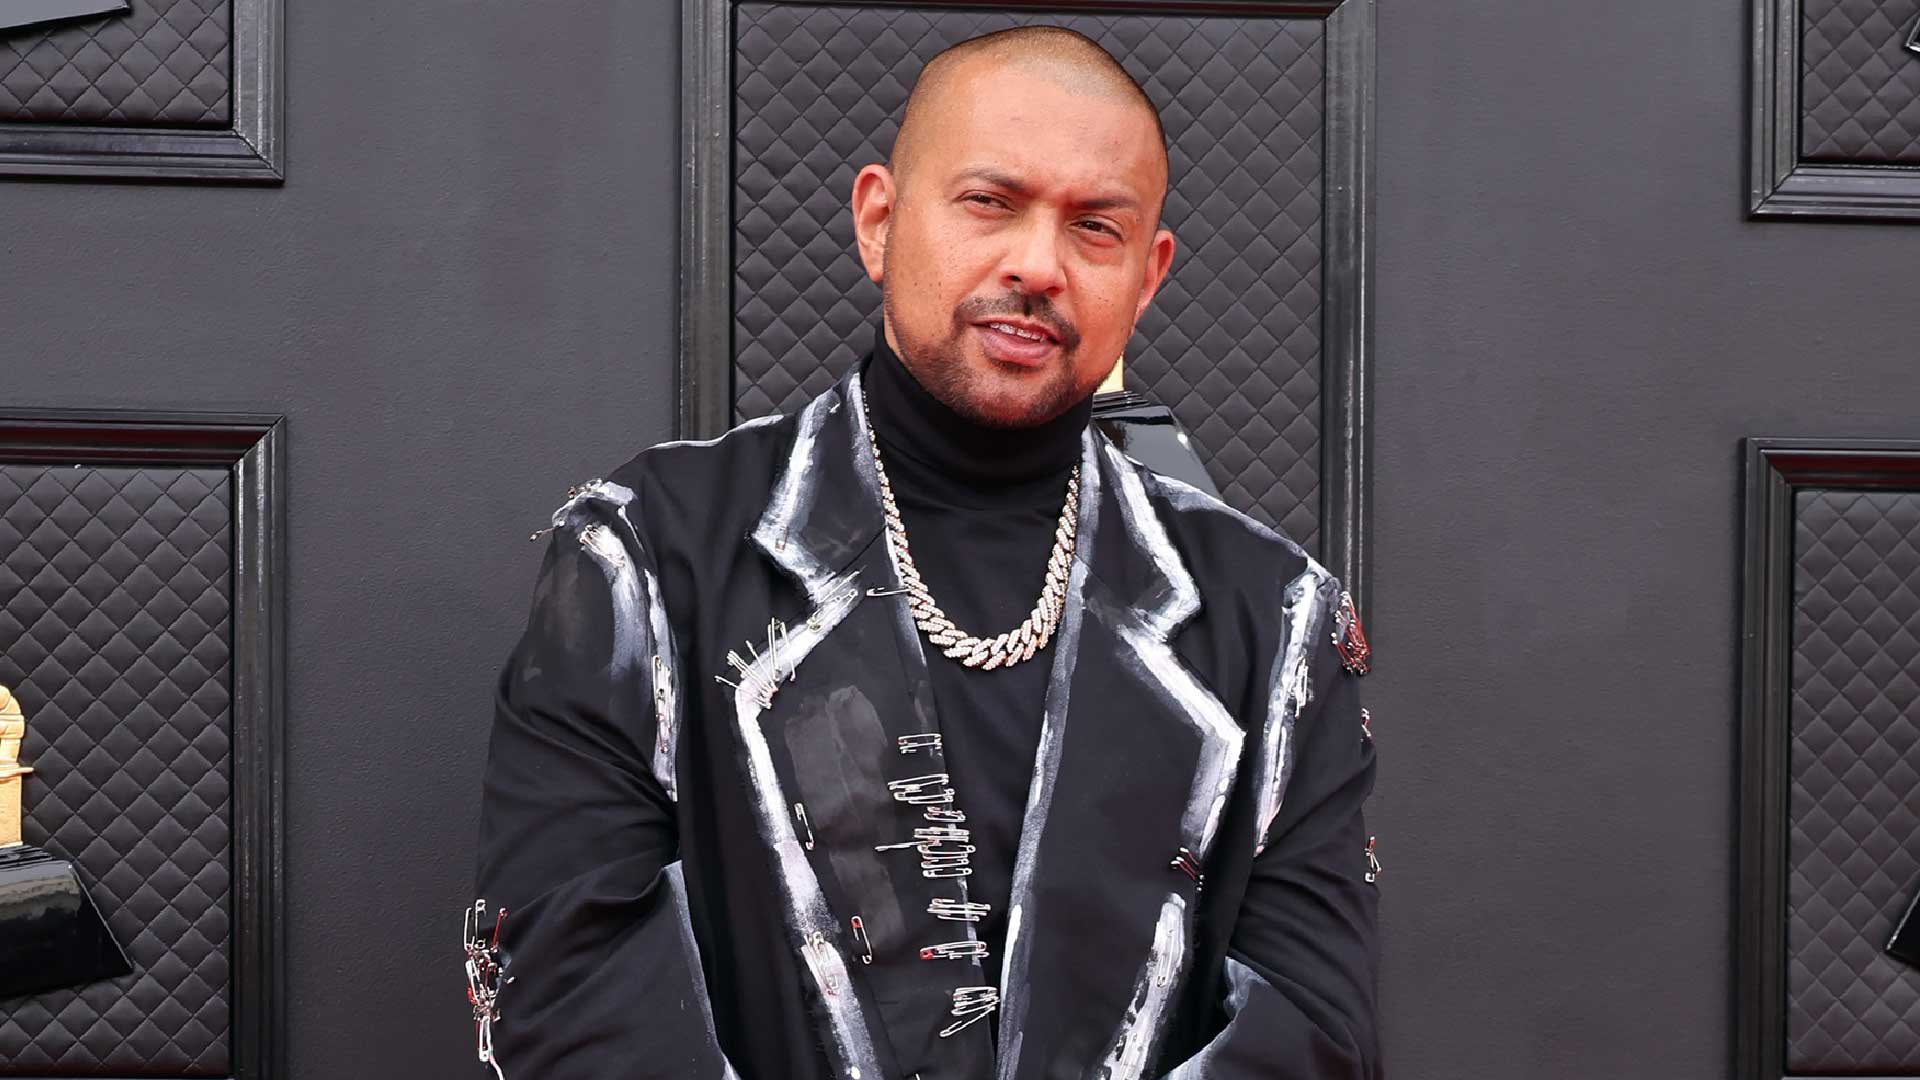 Sean Paul shares a bizarre and unorthodox hobby that is far removed from the high-life of rapping.